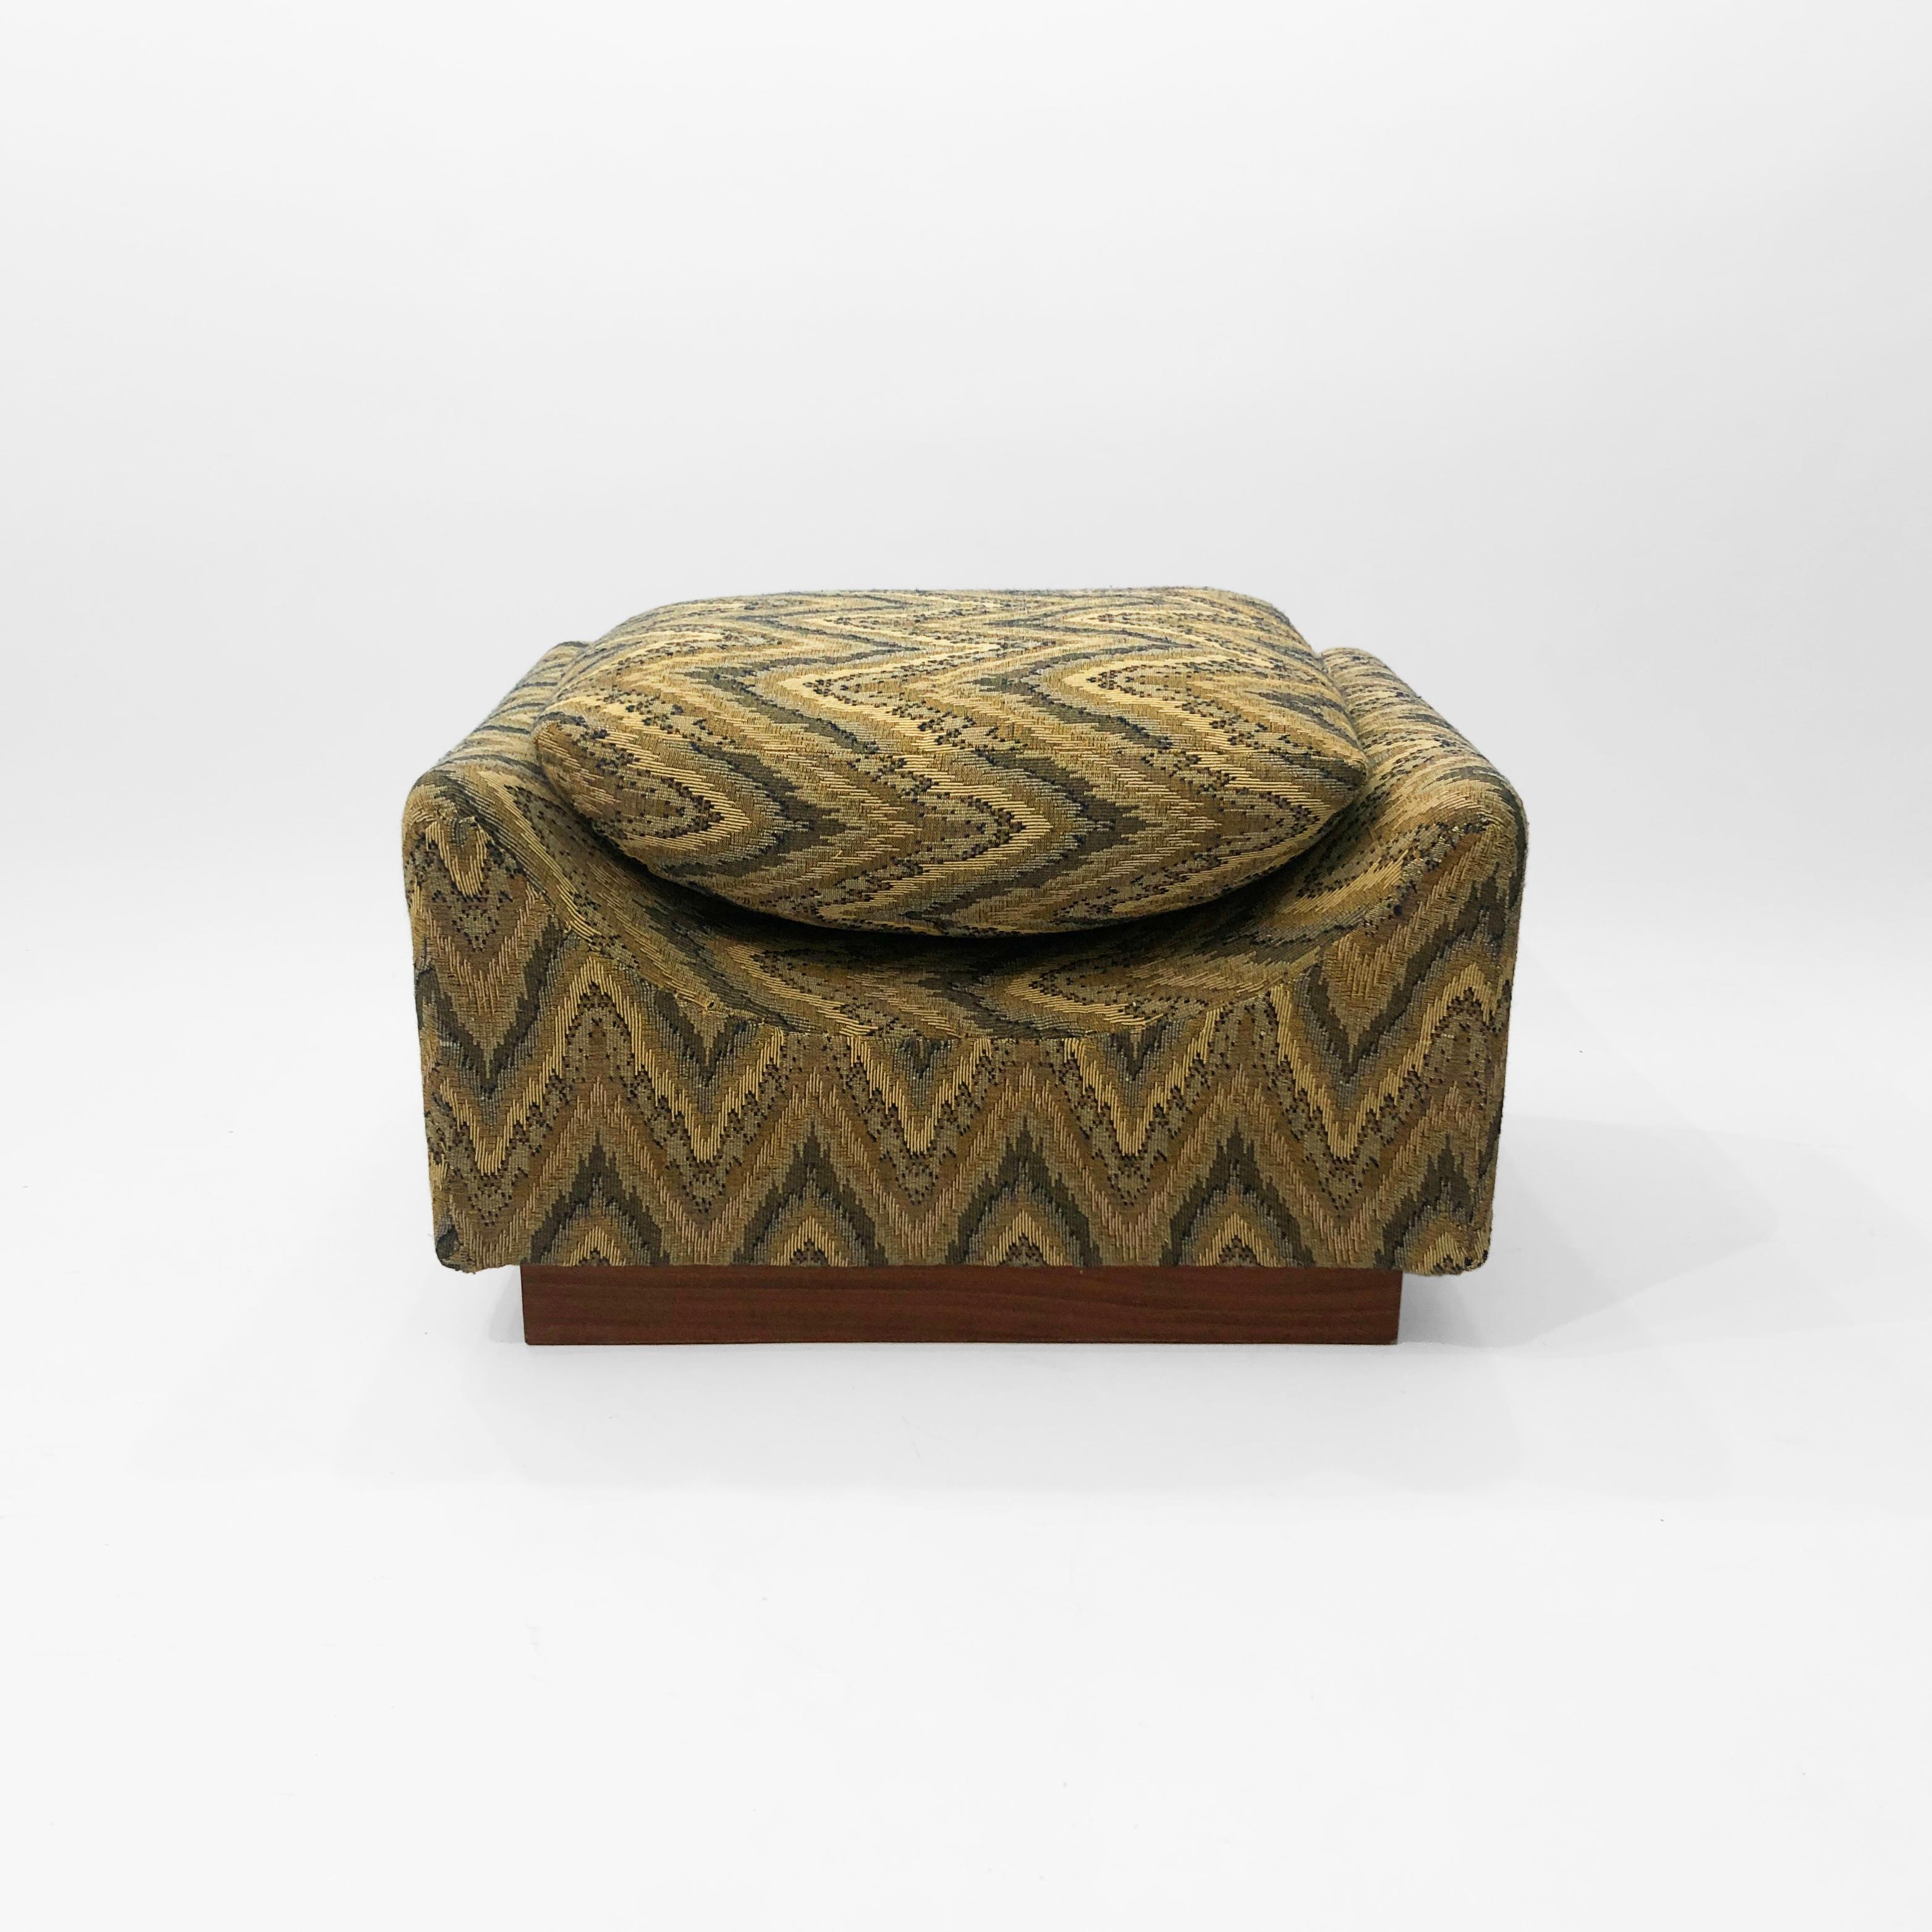 A 1960s Italian stool in a pleasing M shape and Missoni style fabric on wooden pedestal, a stylish and practical piece. This stool imported from Greece but its Italian made with its quality and style still holding strong today.
The Missoni style